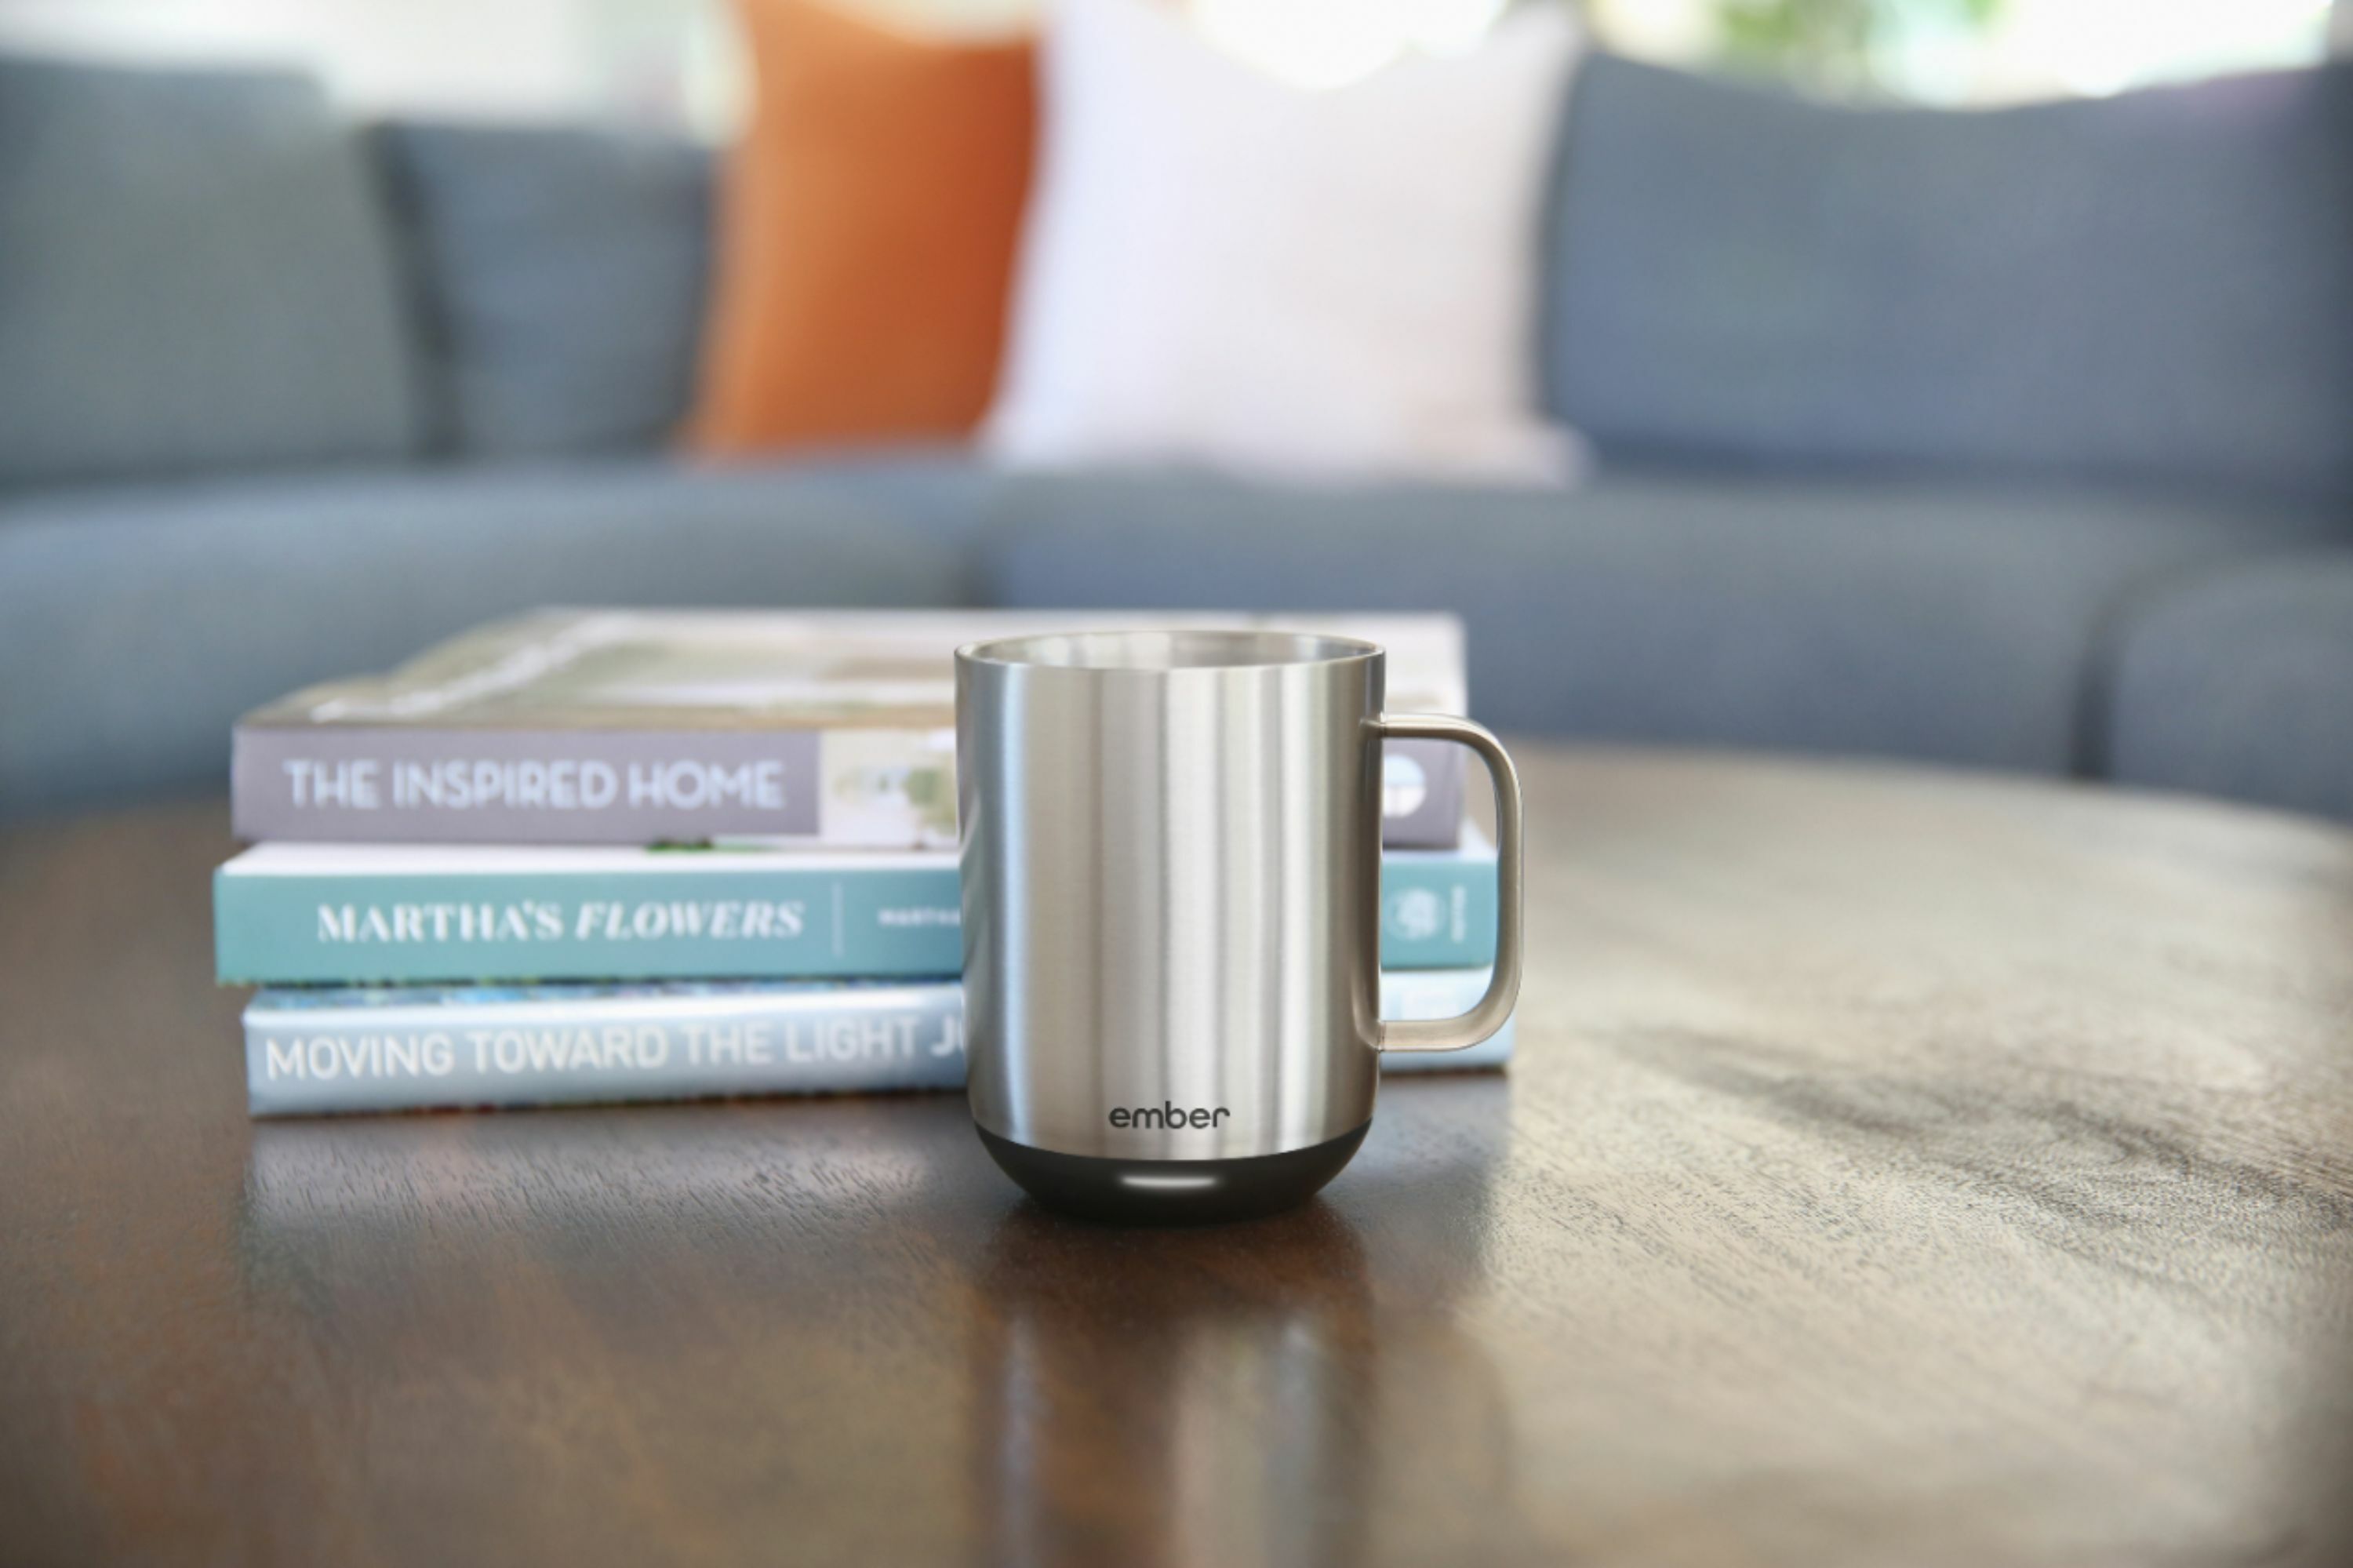 stainless steel ember mug on a coffee table in front of some books